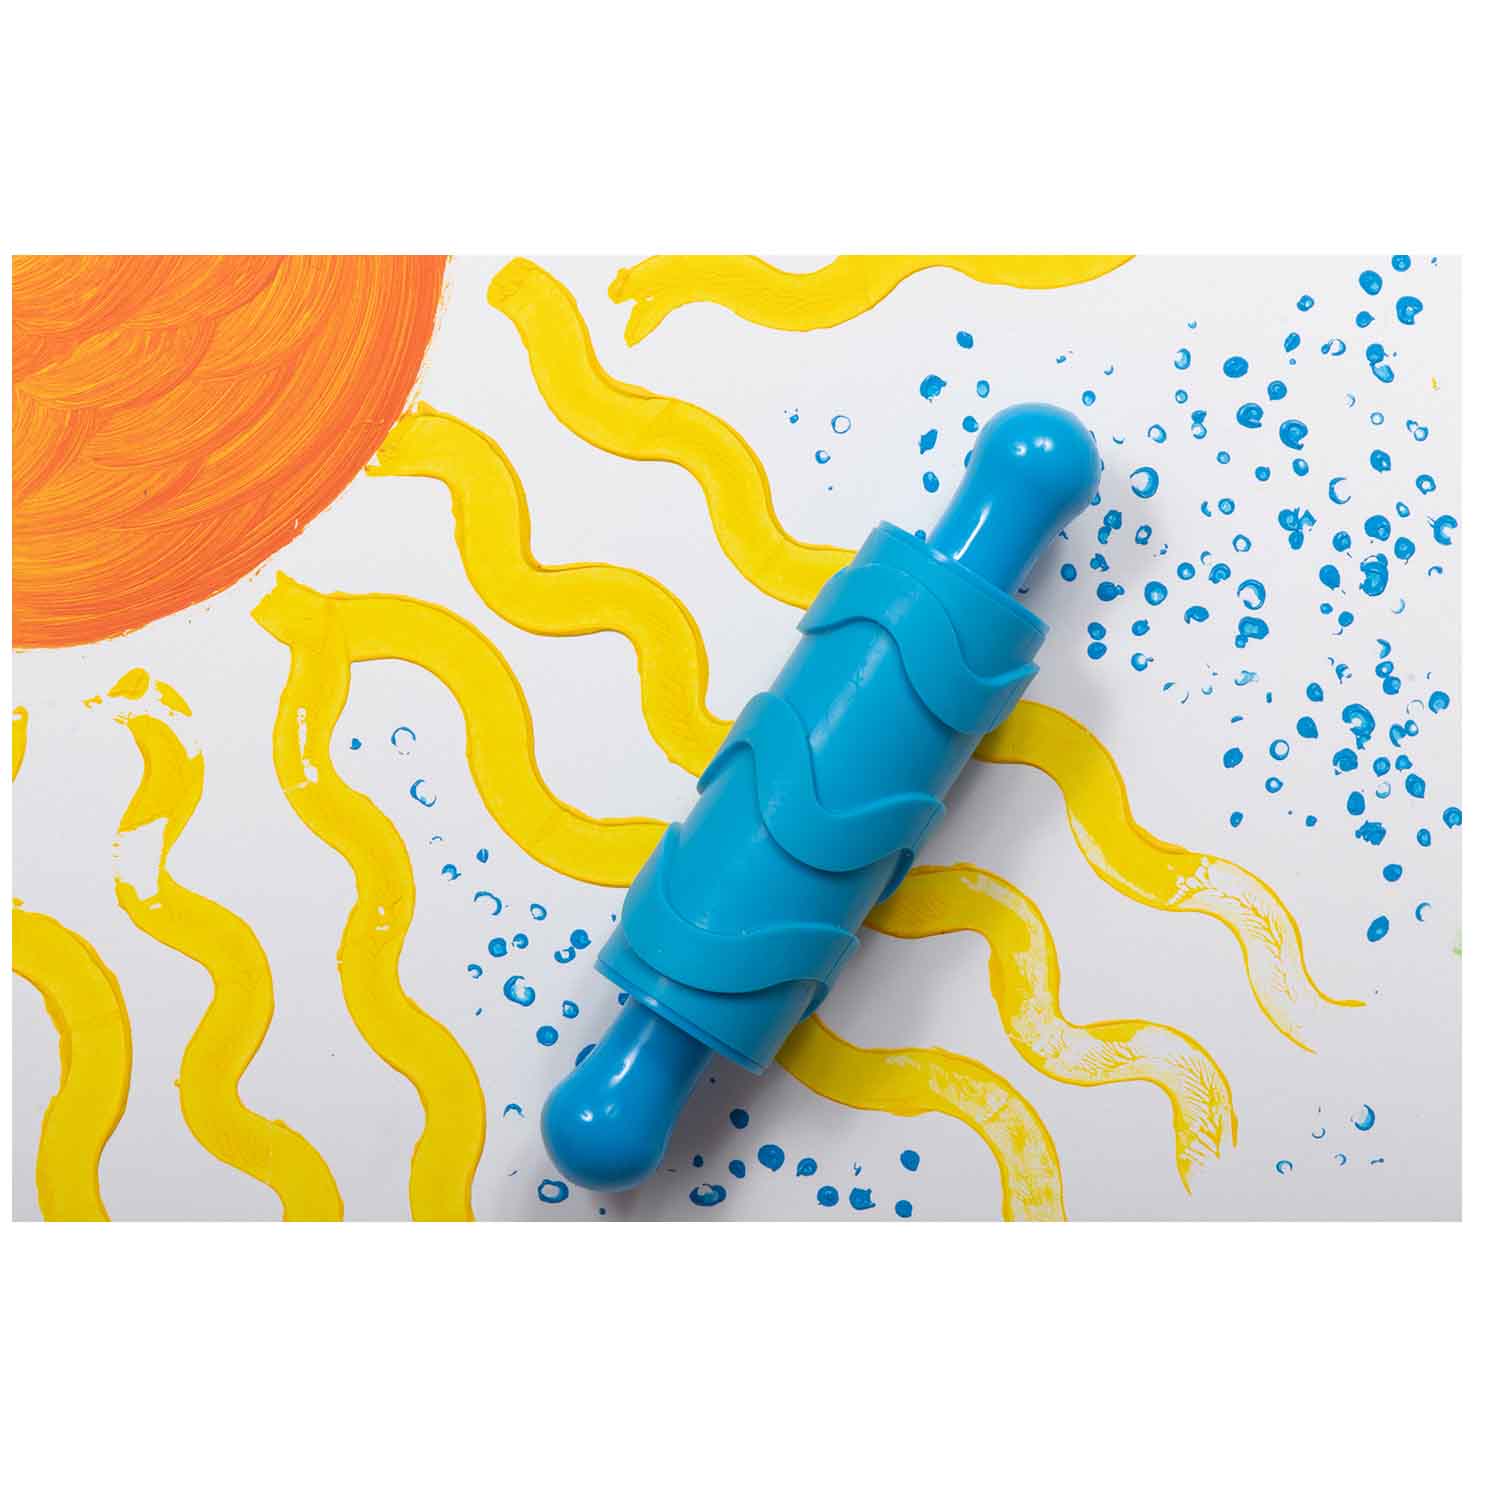 Paint & Clay Texture Rollers